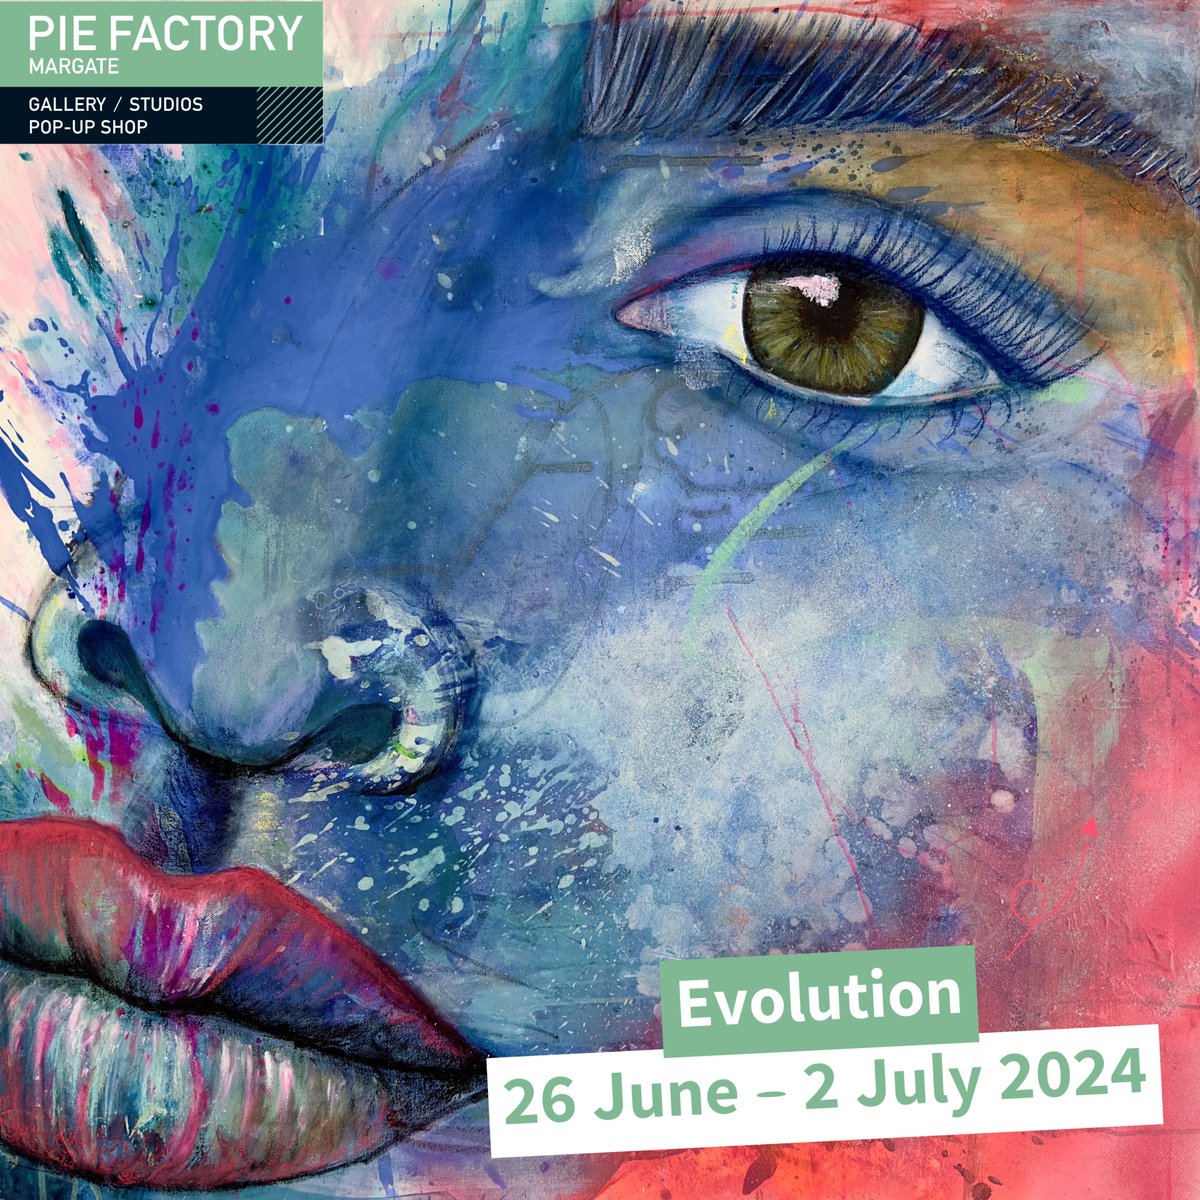 Join us from June 26th to July 2nd at @PFactoryMargate for an extraordinary showcase of Evolution: the evolution of four exceptional Kent artists. Experience their evolution first-hand and witness the beauty that transcends time and medium. #margate #cliftonville #thanet #kent